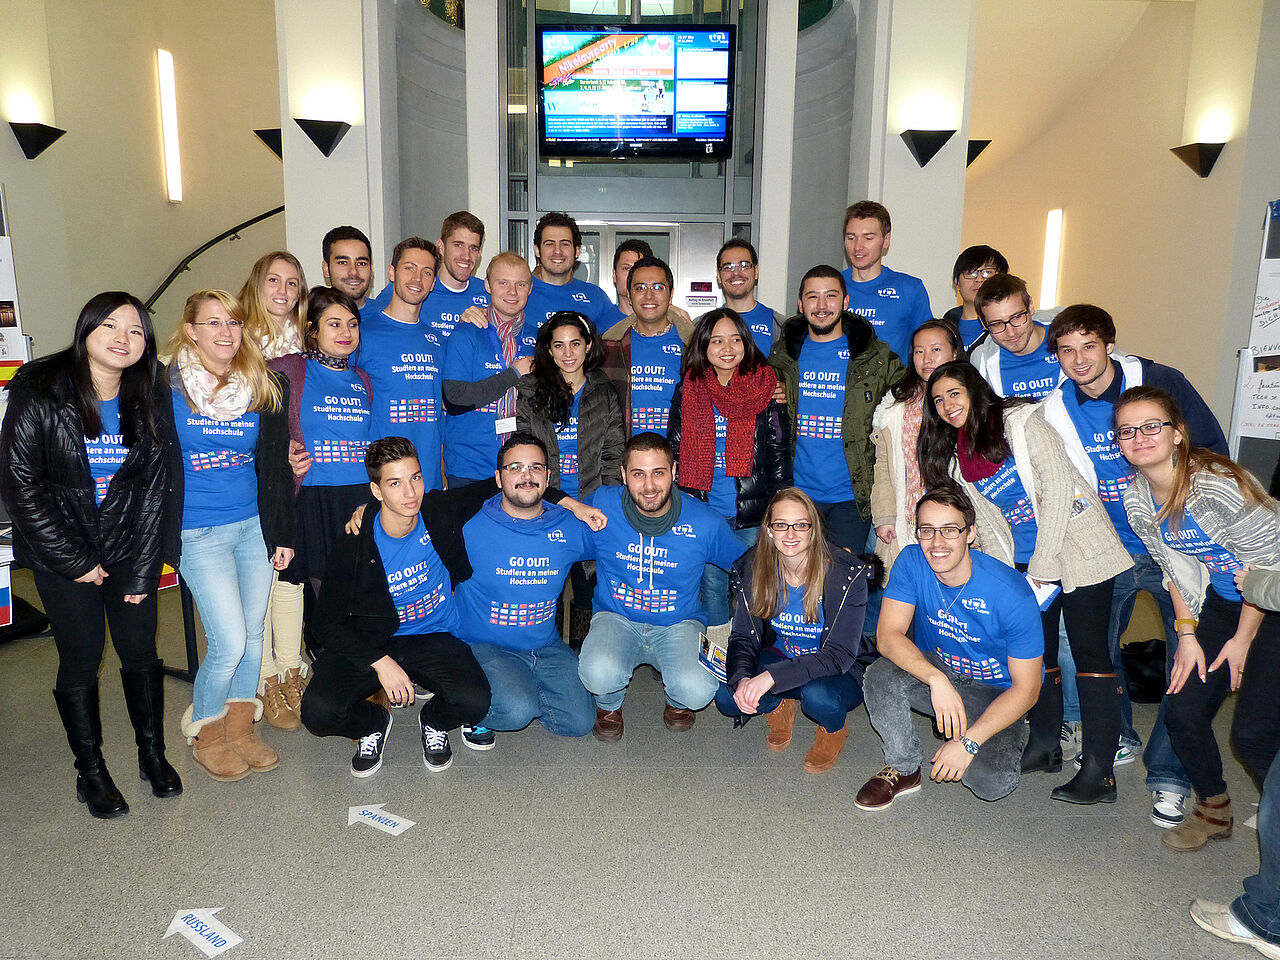 Group picture of incoming students all dressed in blue GO OUT! T-Shirts